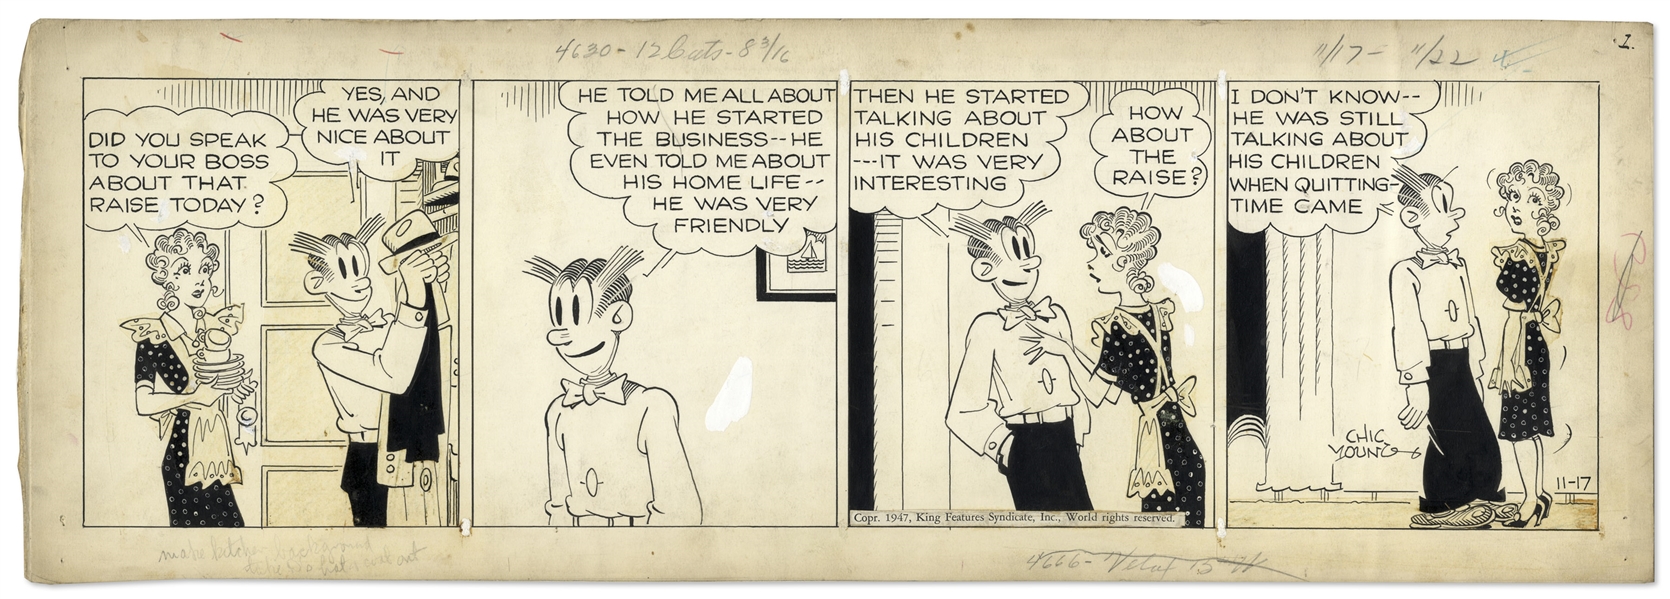 Chic Young Hand-Drawn ''Blondie'' Comic Strip From 1947 Titled ''But Money Talks!''